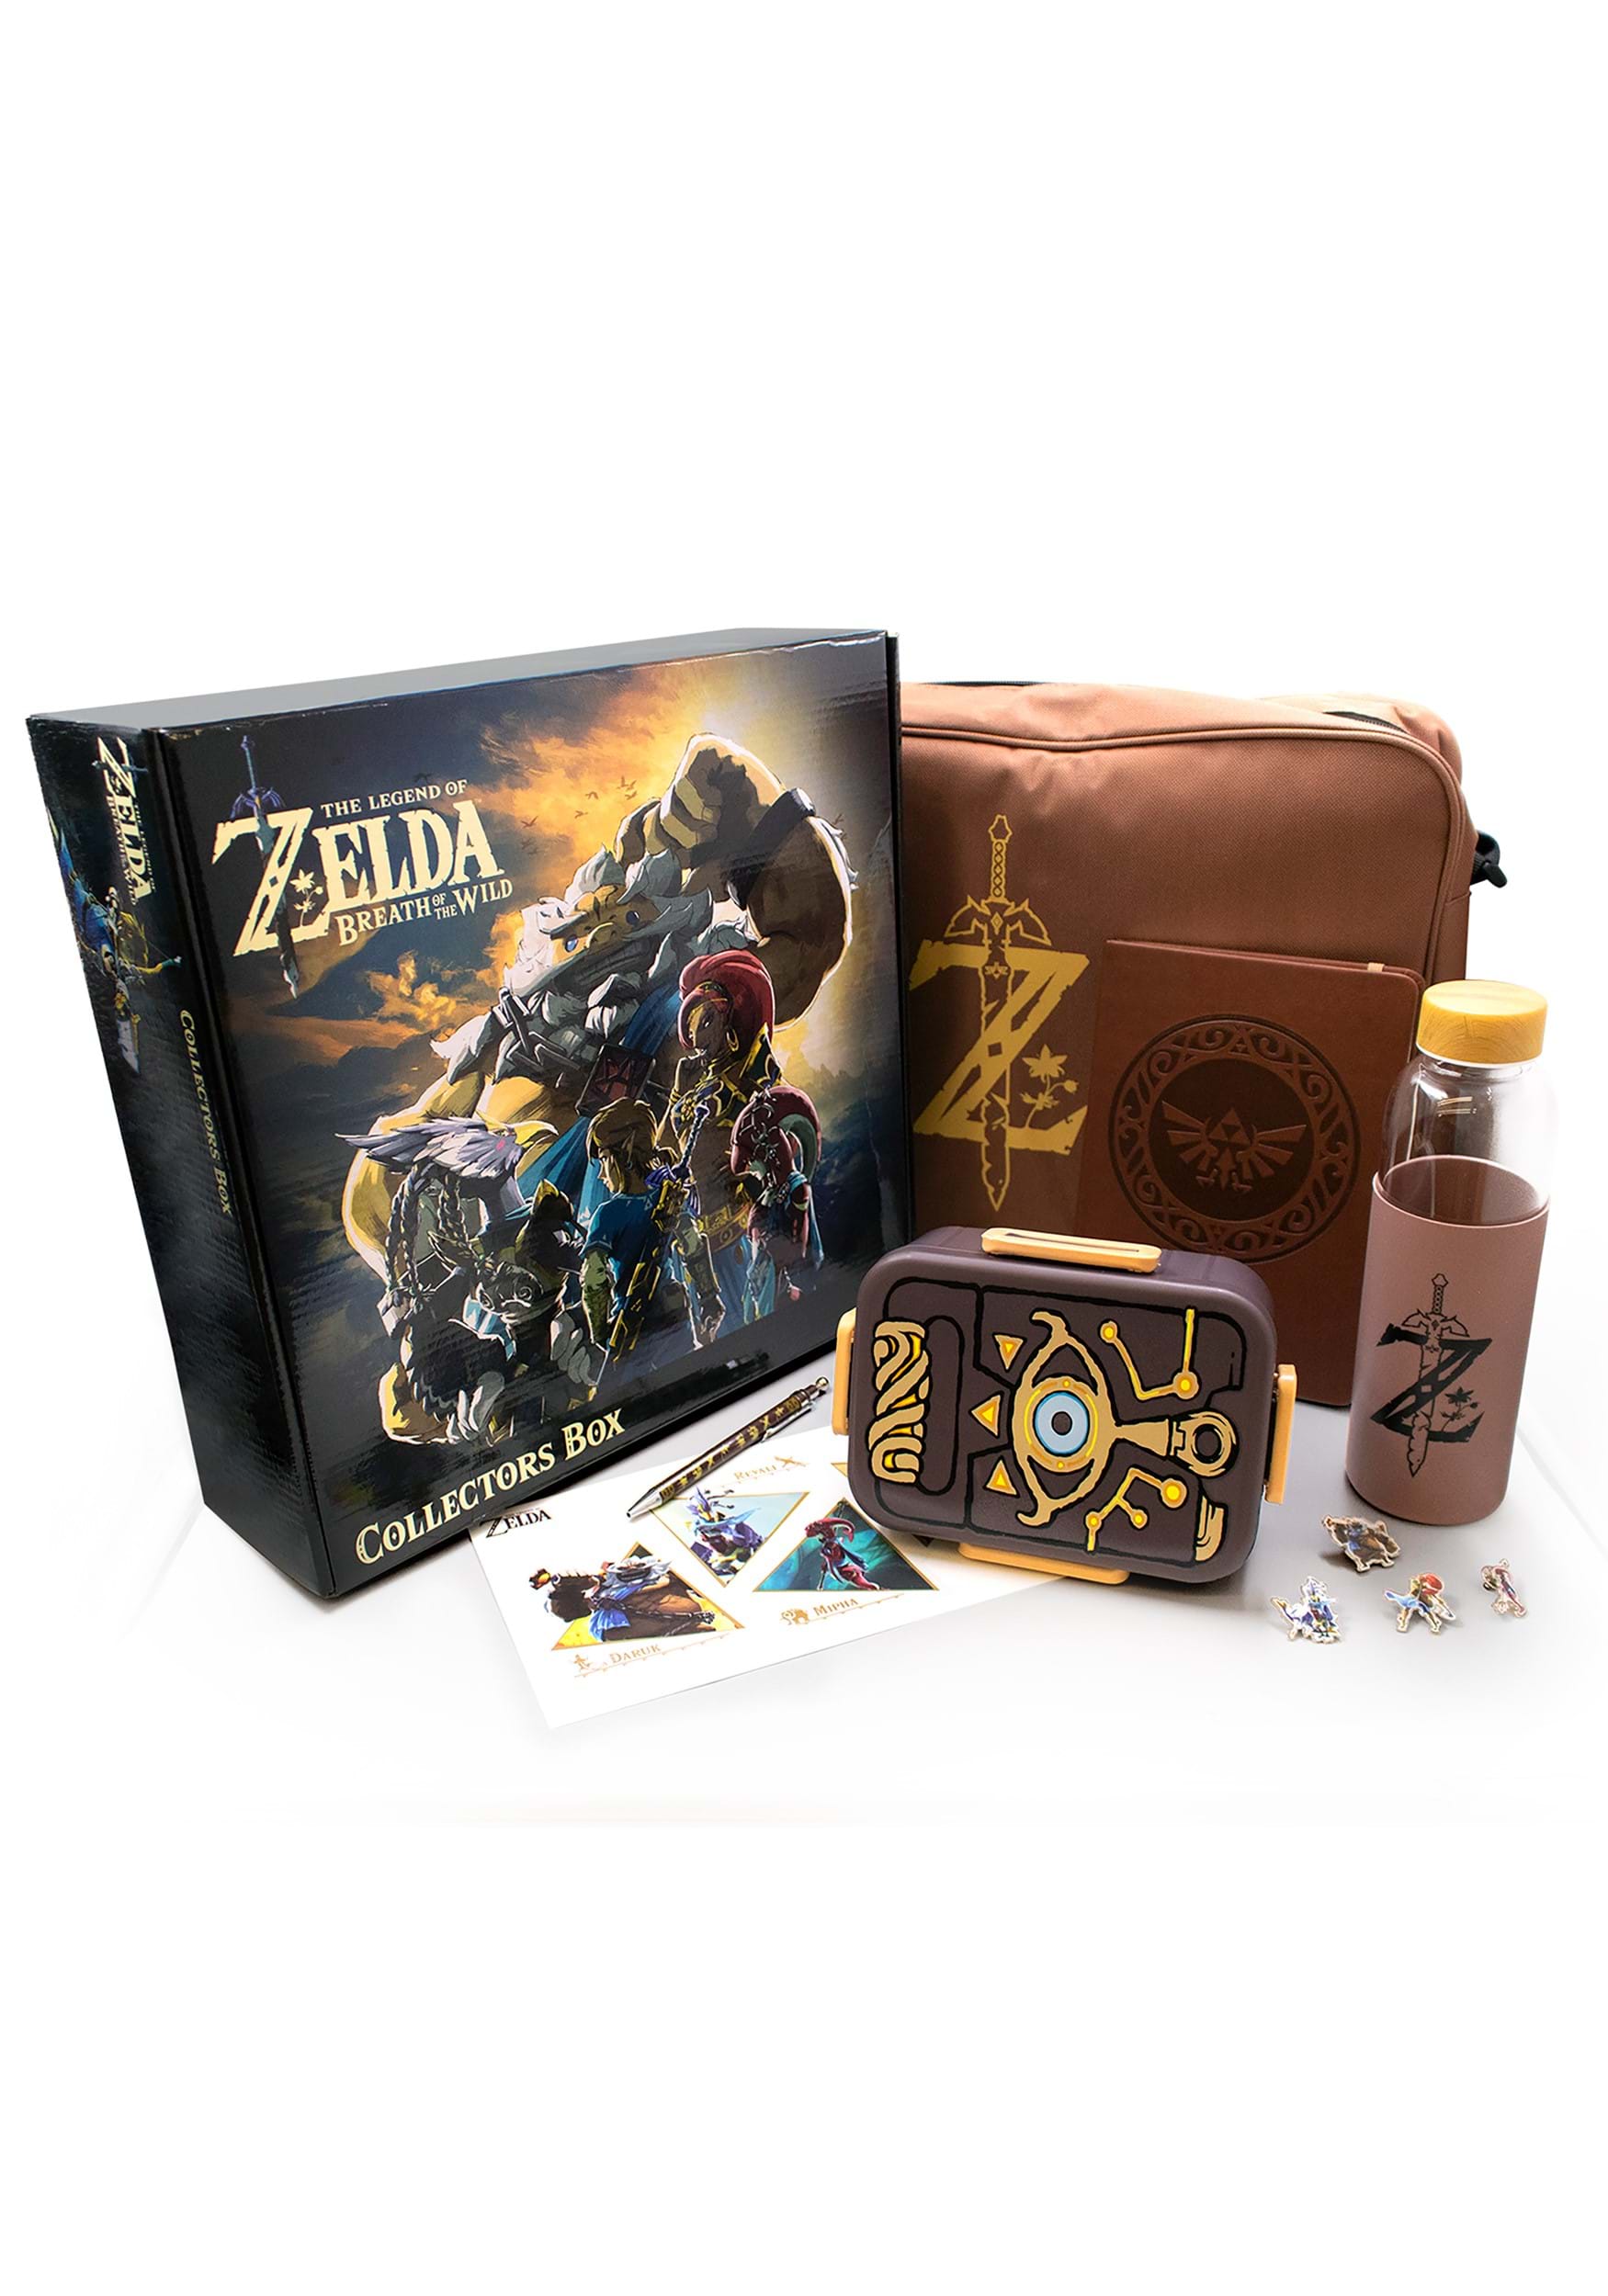 The Legend of Zelda: Breath Of The Wild (Collector’s Box)